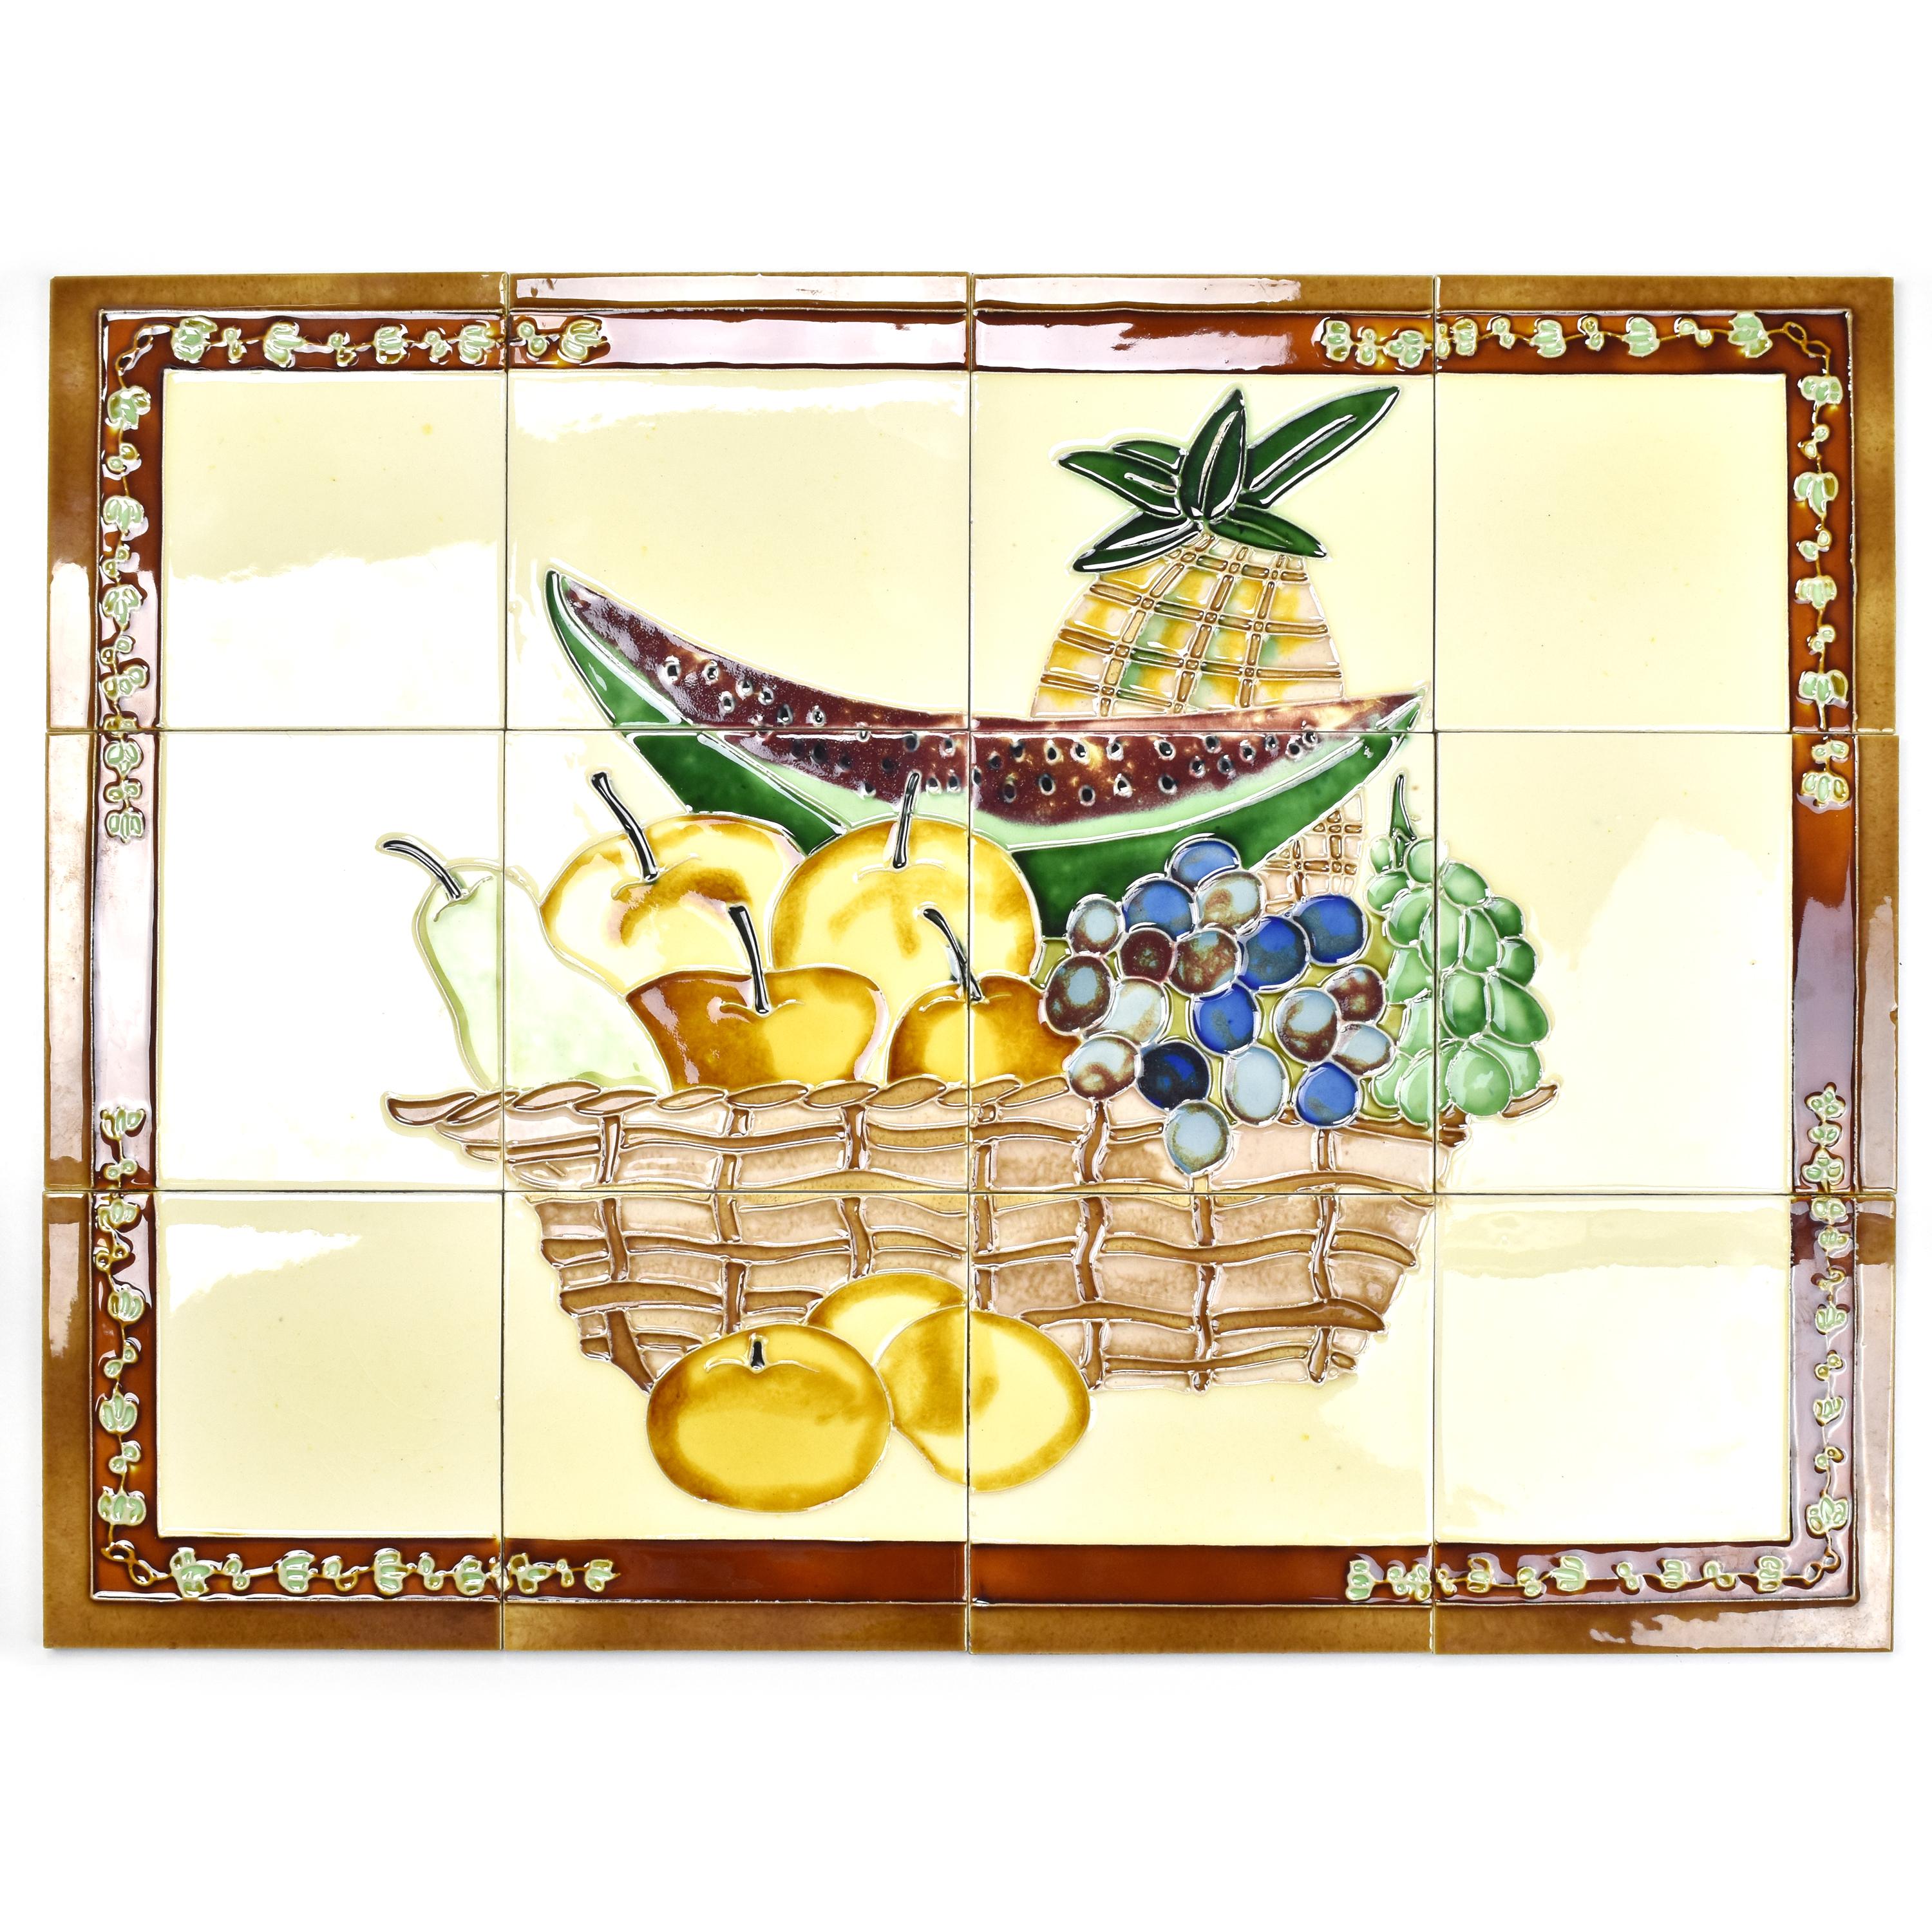 A vintage set of 12 ceramic majolica wall tile depicting a still life of a fruit basket made in tube line technique dating to the 1950s by unknown manufacturer.
The full set is in nearly mint condition and ready to find its new place as a decorative